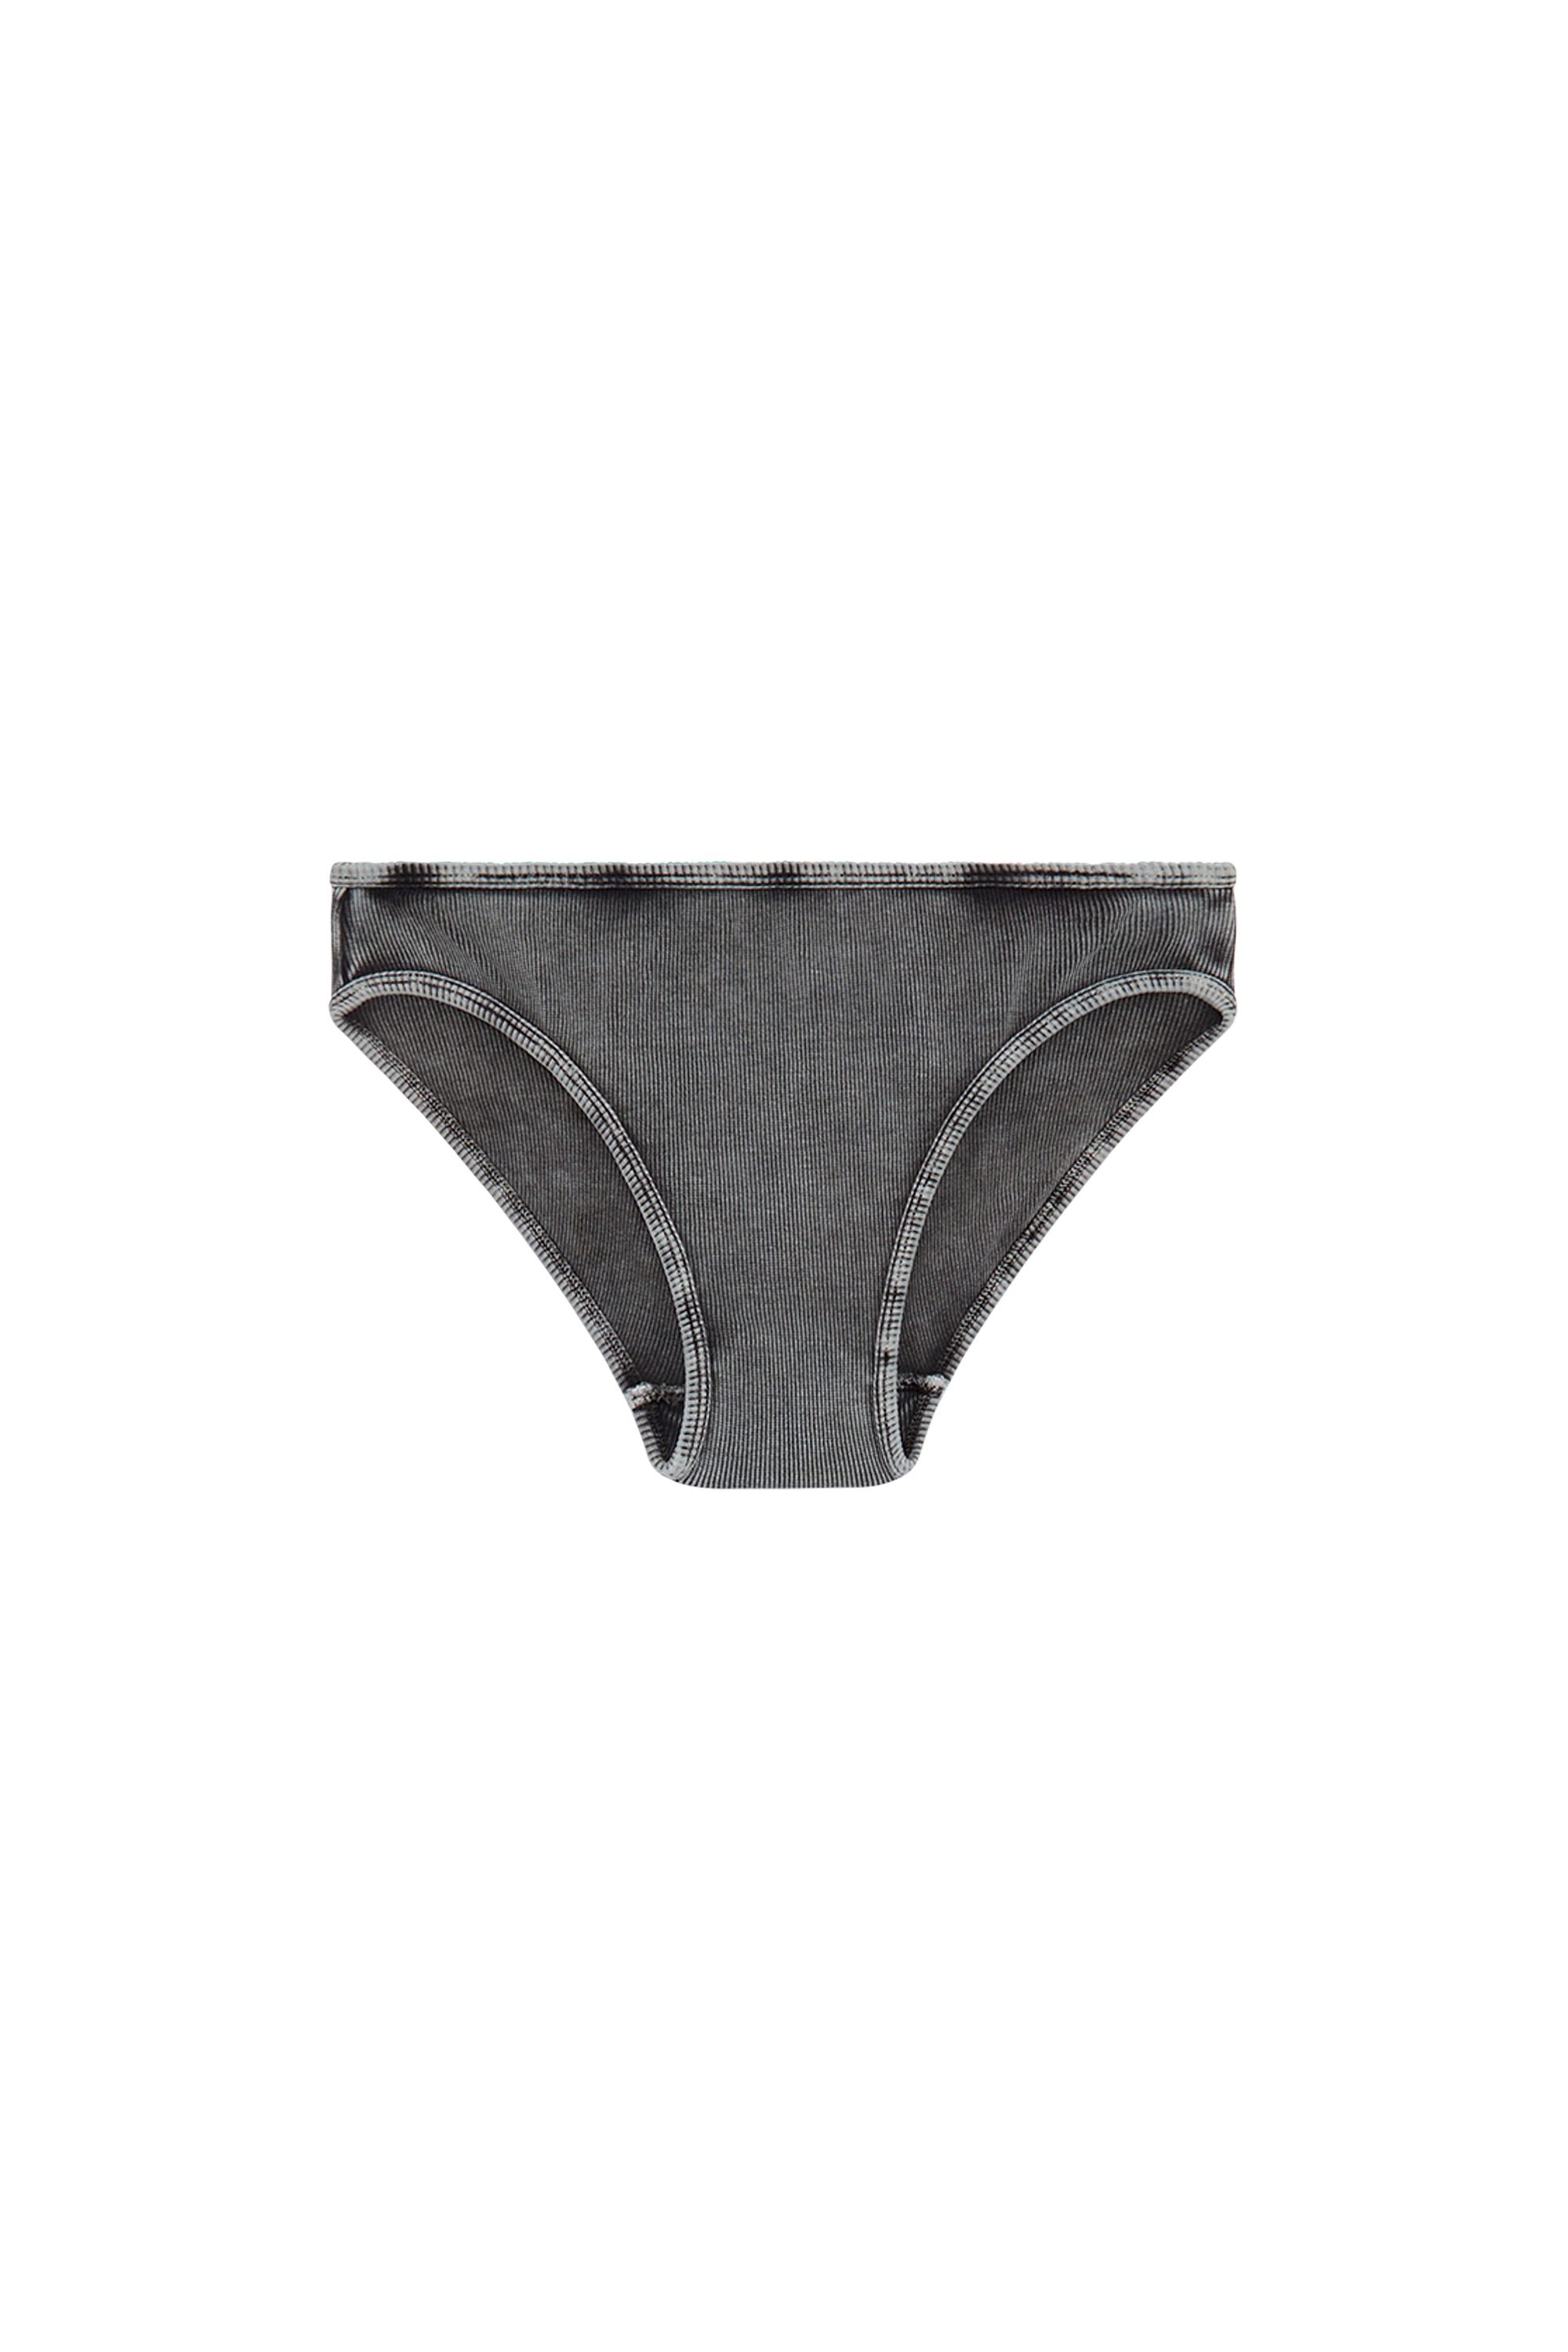 Diesel - UFPN-D-OVAL-HIGH-WAISTED-BRIEF, Mujer Braguitas en canalé con placa Oval D in Negro - Image 4